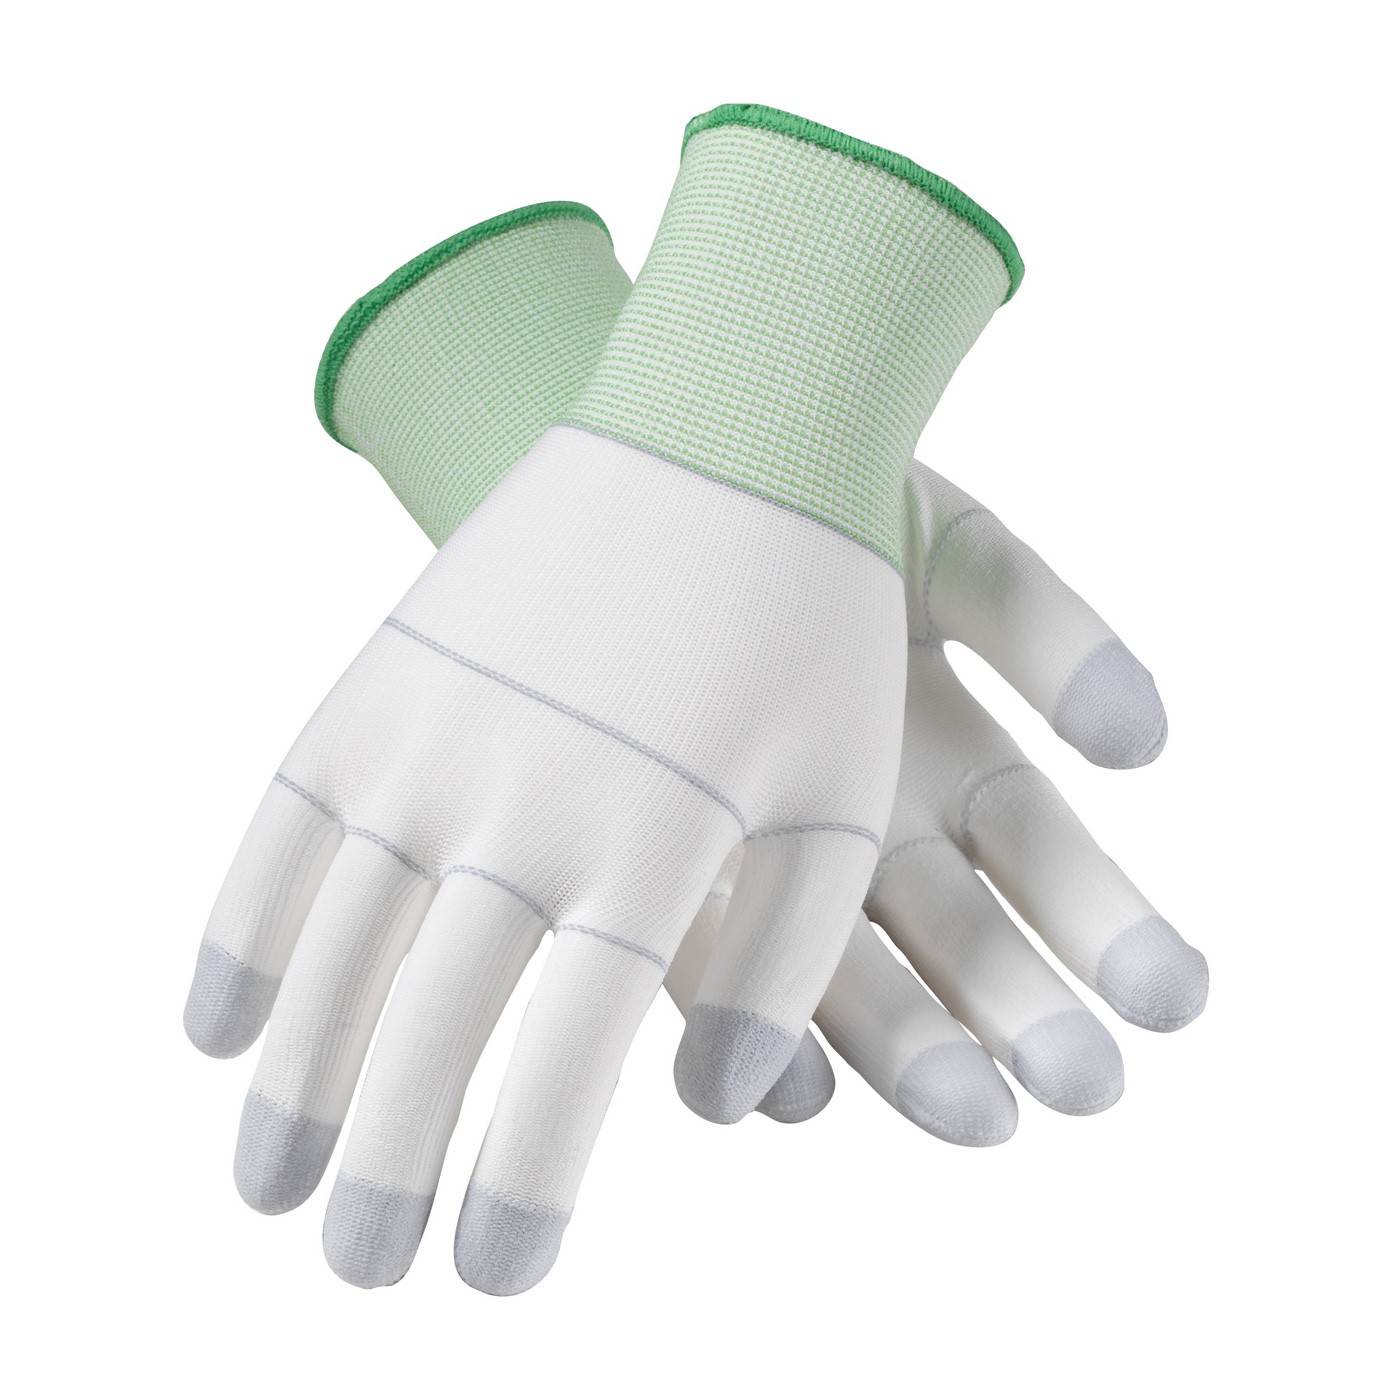 CleanTeam Nylon w/PU Coating on Palm and Finger Tips Size Small